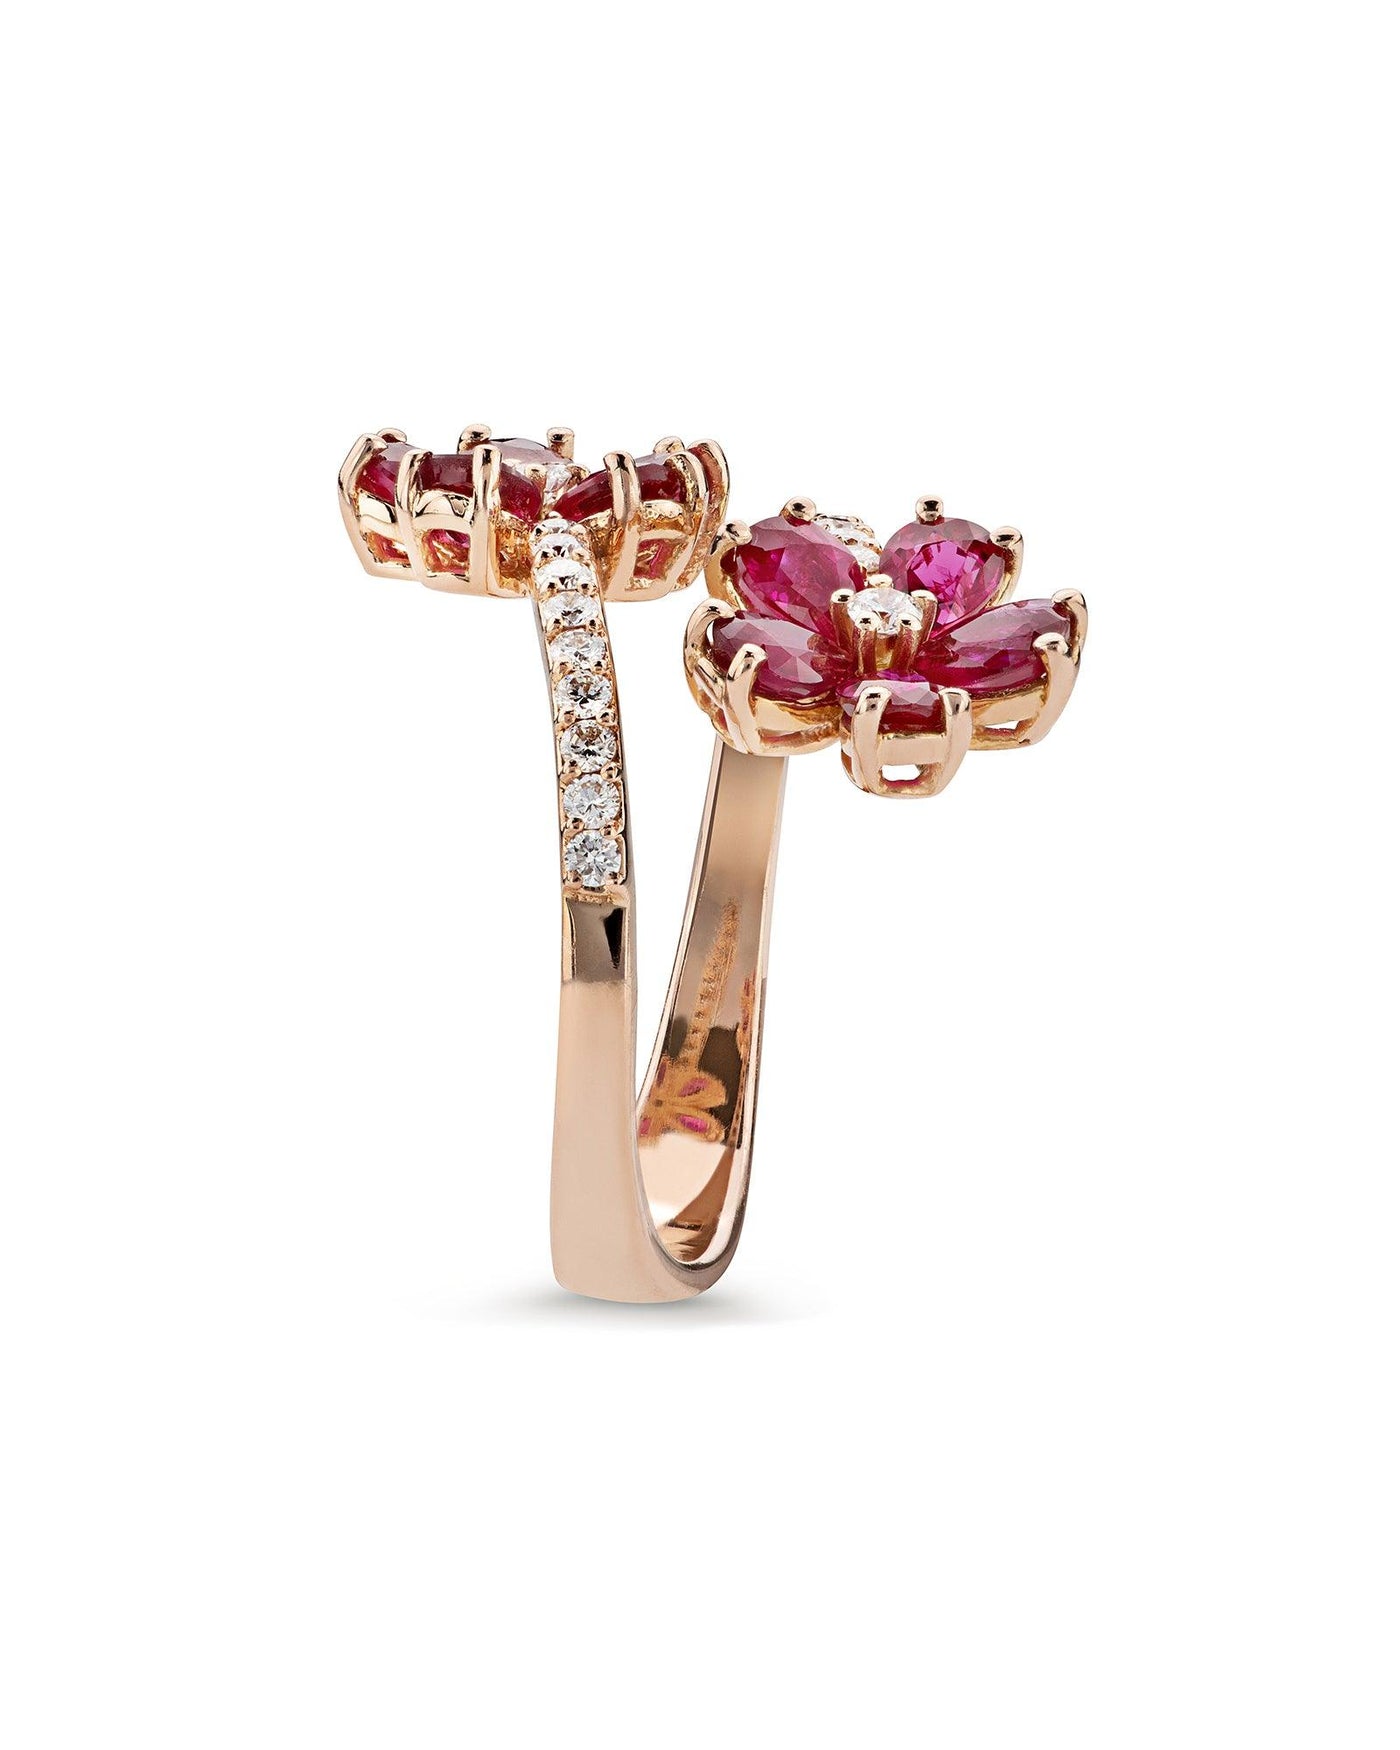 Ring Two Flowers, Rose Gold, Rubies And Diamonds - Moregola Fine Jewelry